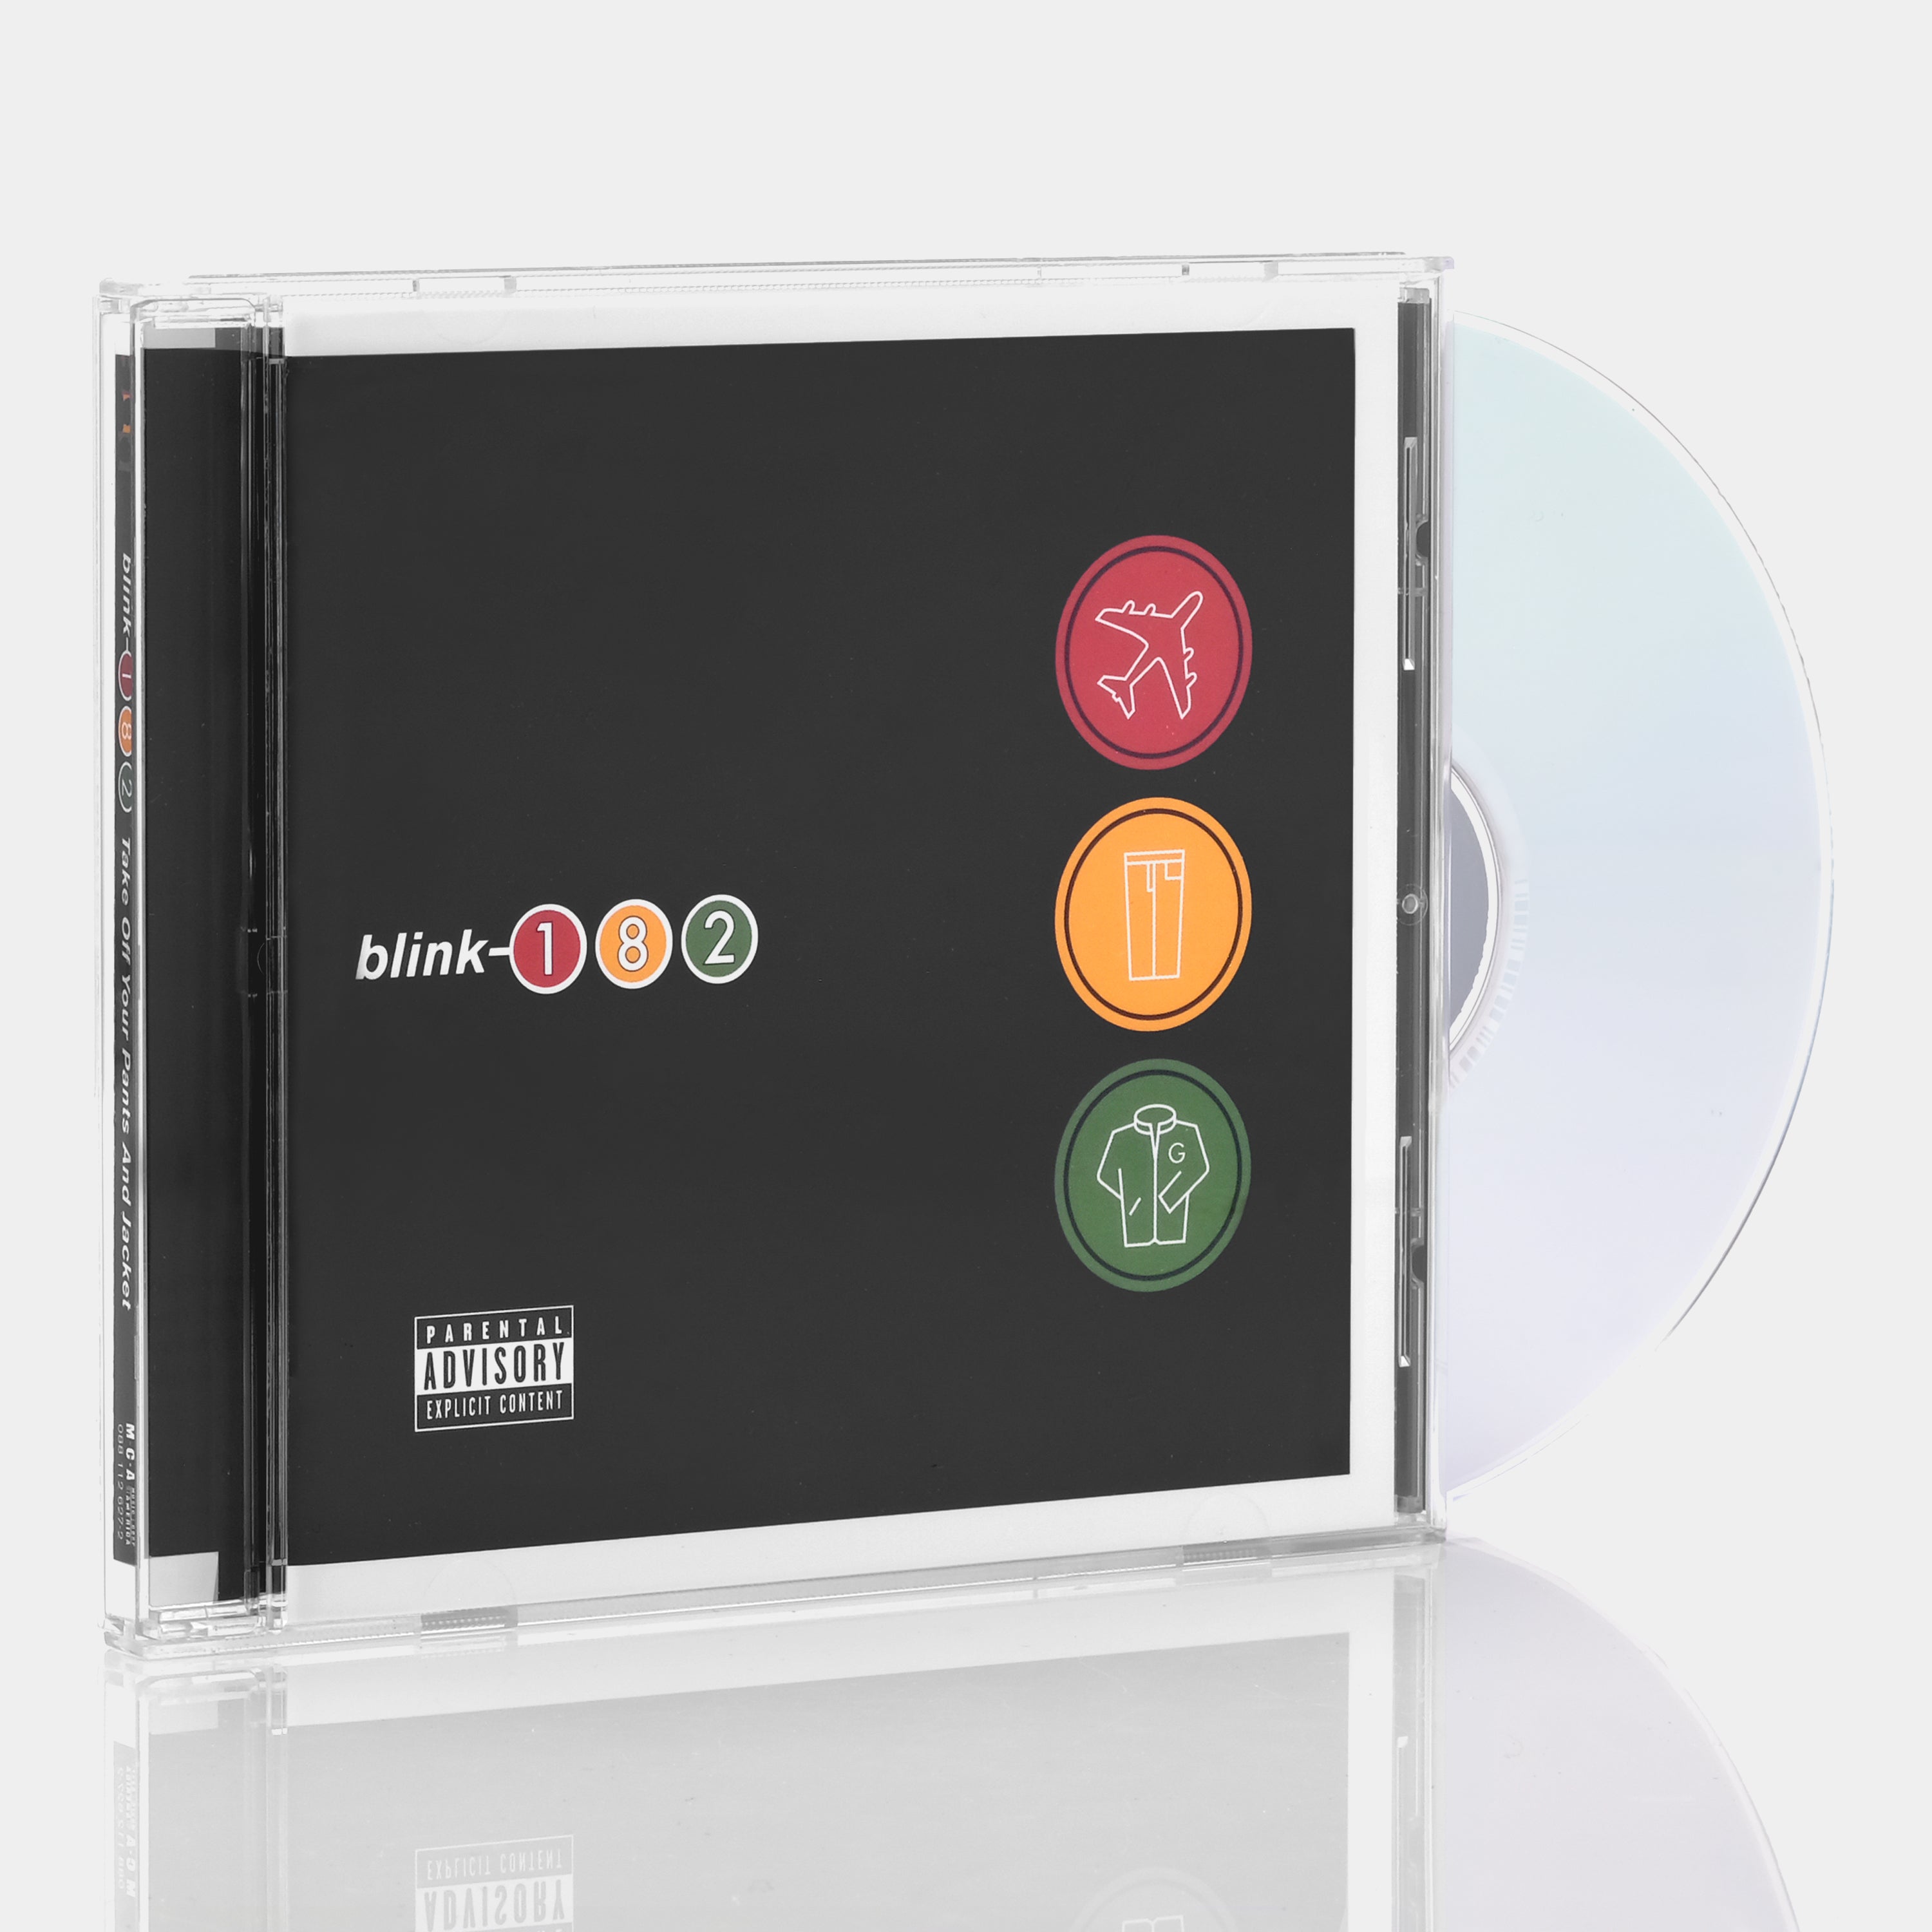 Blink-182 - Take Off Your Pants And Jacket CD